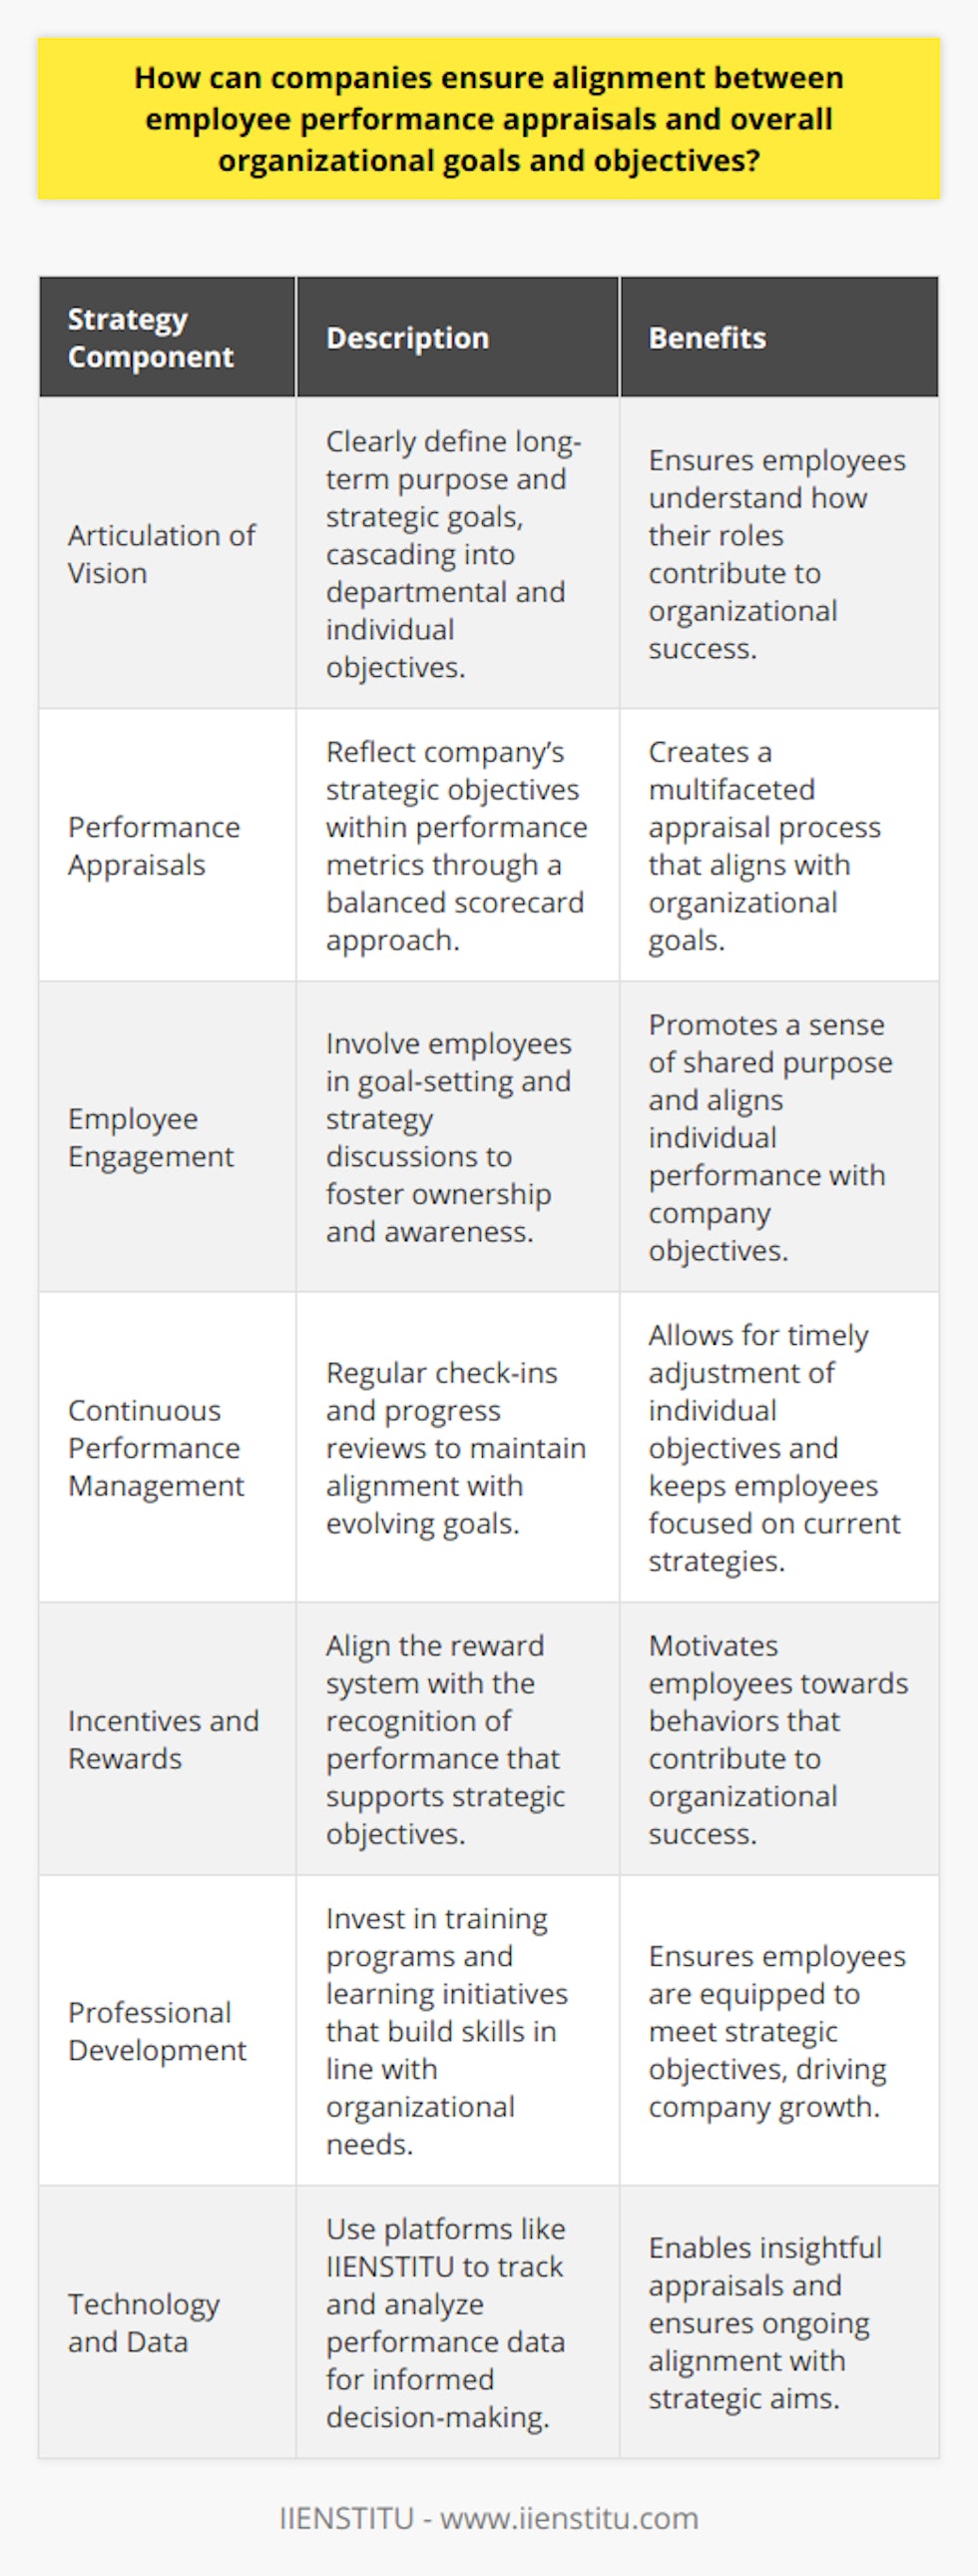 To ensure that employee performance appraisals align with organizational goals and objectives, companies need to implement a strategic approach that bridges the gap between individual achievements and company aspirations.**The Integration of Organizational Vision and Individual Performance**It begins with a clear articulation of the company's vision and objectives. Companies should define their long-term purpose and the strategic goals that will lead them there. This overarching structure should then be distilled into specific departmental and individual objectives that support the broader mission. By doing this, employees can see how their individual roles fit into the larger picture and contribute to organizational success.**Performance Appraisals as a Tool for Strategic Alignment**Performance appraisals should act as a mirror, reflecting the company’s strategic objectives within individual performance metrics. Companies can use the balanced scorecard approach, which integrates financial and non-financial performance indicators, including customer perspective, business process, learning and growth, and financial metrics. This model ensures that appraisals are multifaceted and align with various aspects of company goals.**Creating Synergy Through Employee Engagement**Incorporating employees in the goal-setting process can also promote alignment. When employees are engaged in dialogue about how their work contributes to company objectives, they’re more likely to take ownership of their role in the company’s success. Moreover, consistent communication helps employees stay abreast of any shifts in company strategy.**Performance Management as a Continuous Process**Performance management should be treated as an ongoing process rather than an annual event. Regular check-ins and progress reviews can help keep employees aligned with the company’s goals as they evolve. This also allows for timely adjustments in individual objectives to reflect any changes in organizational direction.**Tailoring Incentives and Rewards**The reward system of a company must also be calibrated to promote behaviors and results that support organizational goals. Recognizing and rewarding performance that directly contributes to strategic objectives reinforces the importance of alignment and motivates employees to work towards the common good of the company.**Investment in Professional Development**Companies should also invest in the continuous professional development of employees to ensure they possess the skills and knowledge required to achieve set objectives. This can be achieved through training programs and learning initiatives that expand employee capabilities in alignment with organizational needs.**Utilizing Technology and Data for Insightful Appraisals**Leveraging technology platforms, such as IIENSTITU, organizations can gain deeper insights into employee performance data and trends to make informed decisions. These platforms can assist in tracking, managing, and analyzing performance metrics over time, ensuring they are consistently aligned with the company's strategic objectives.In conclusion, alignment between employee performance appraisals and organizational goals and objectives is achieved through a clear definition of company aims, strategic integration of performance metrics, employee engagement, continuous feedback, tailored reward systems, ongoing professional development, and the strategic use of technology. This comprehensive approach fosters an organizational culture where individual achievements contribute significantly to the company's overall success.